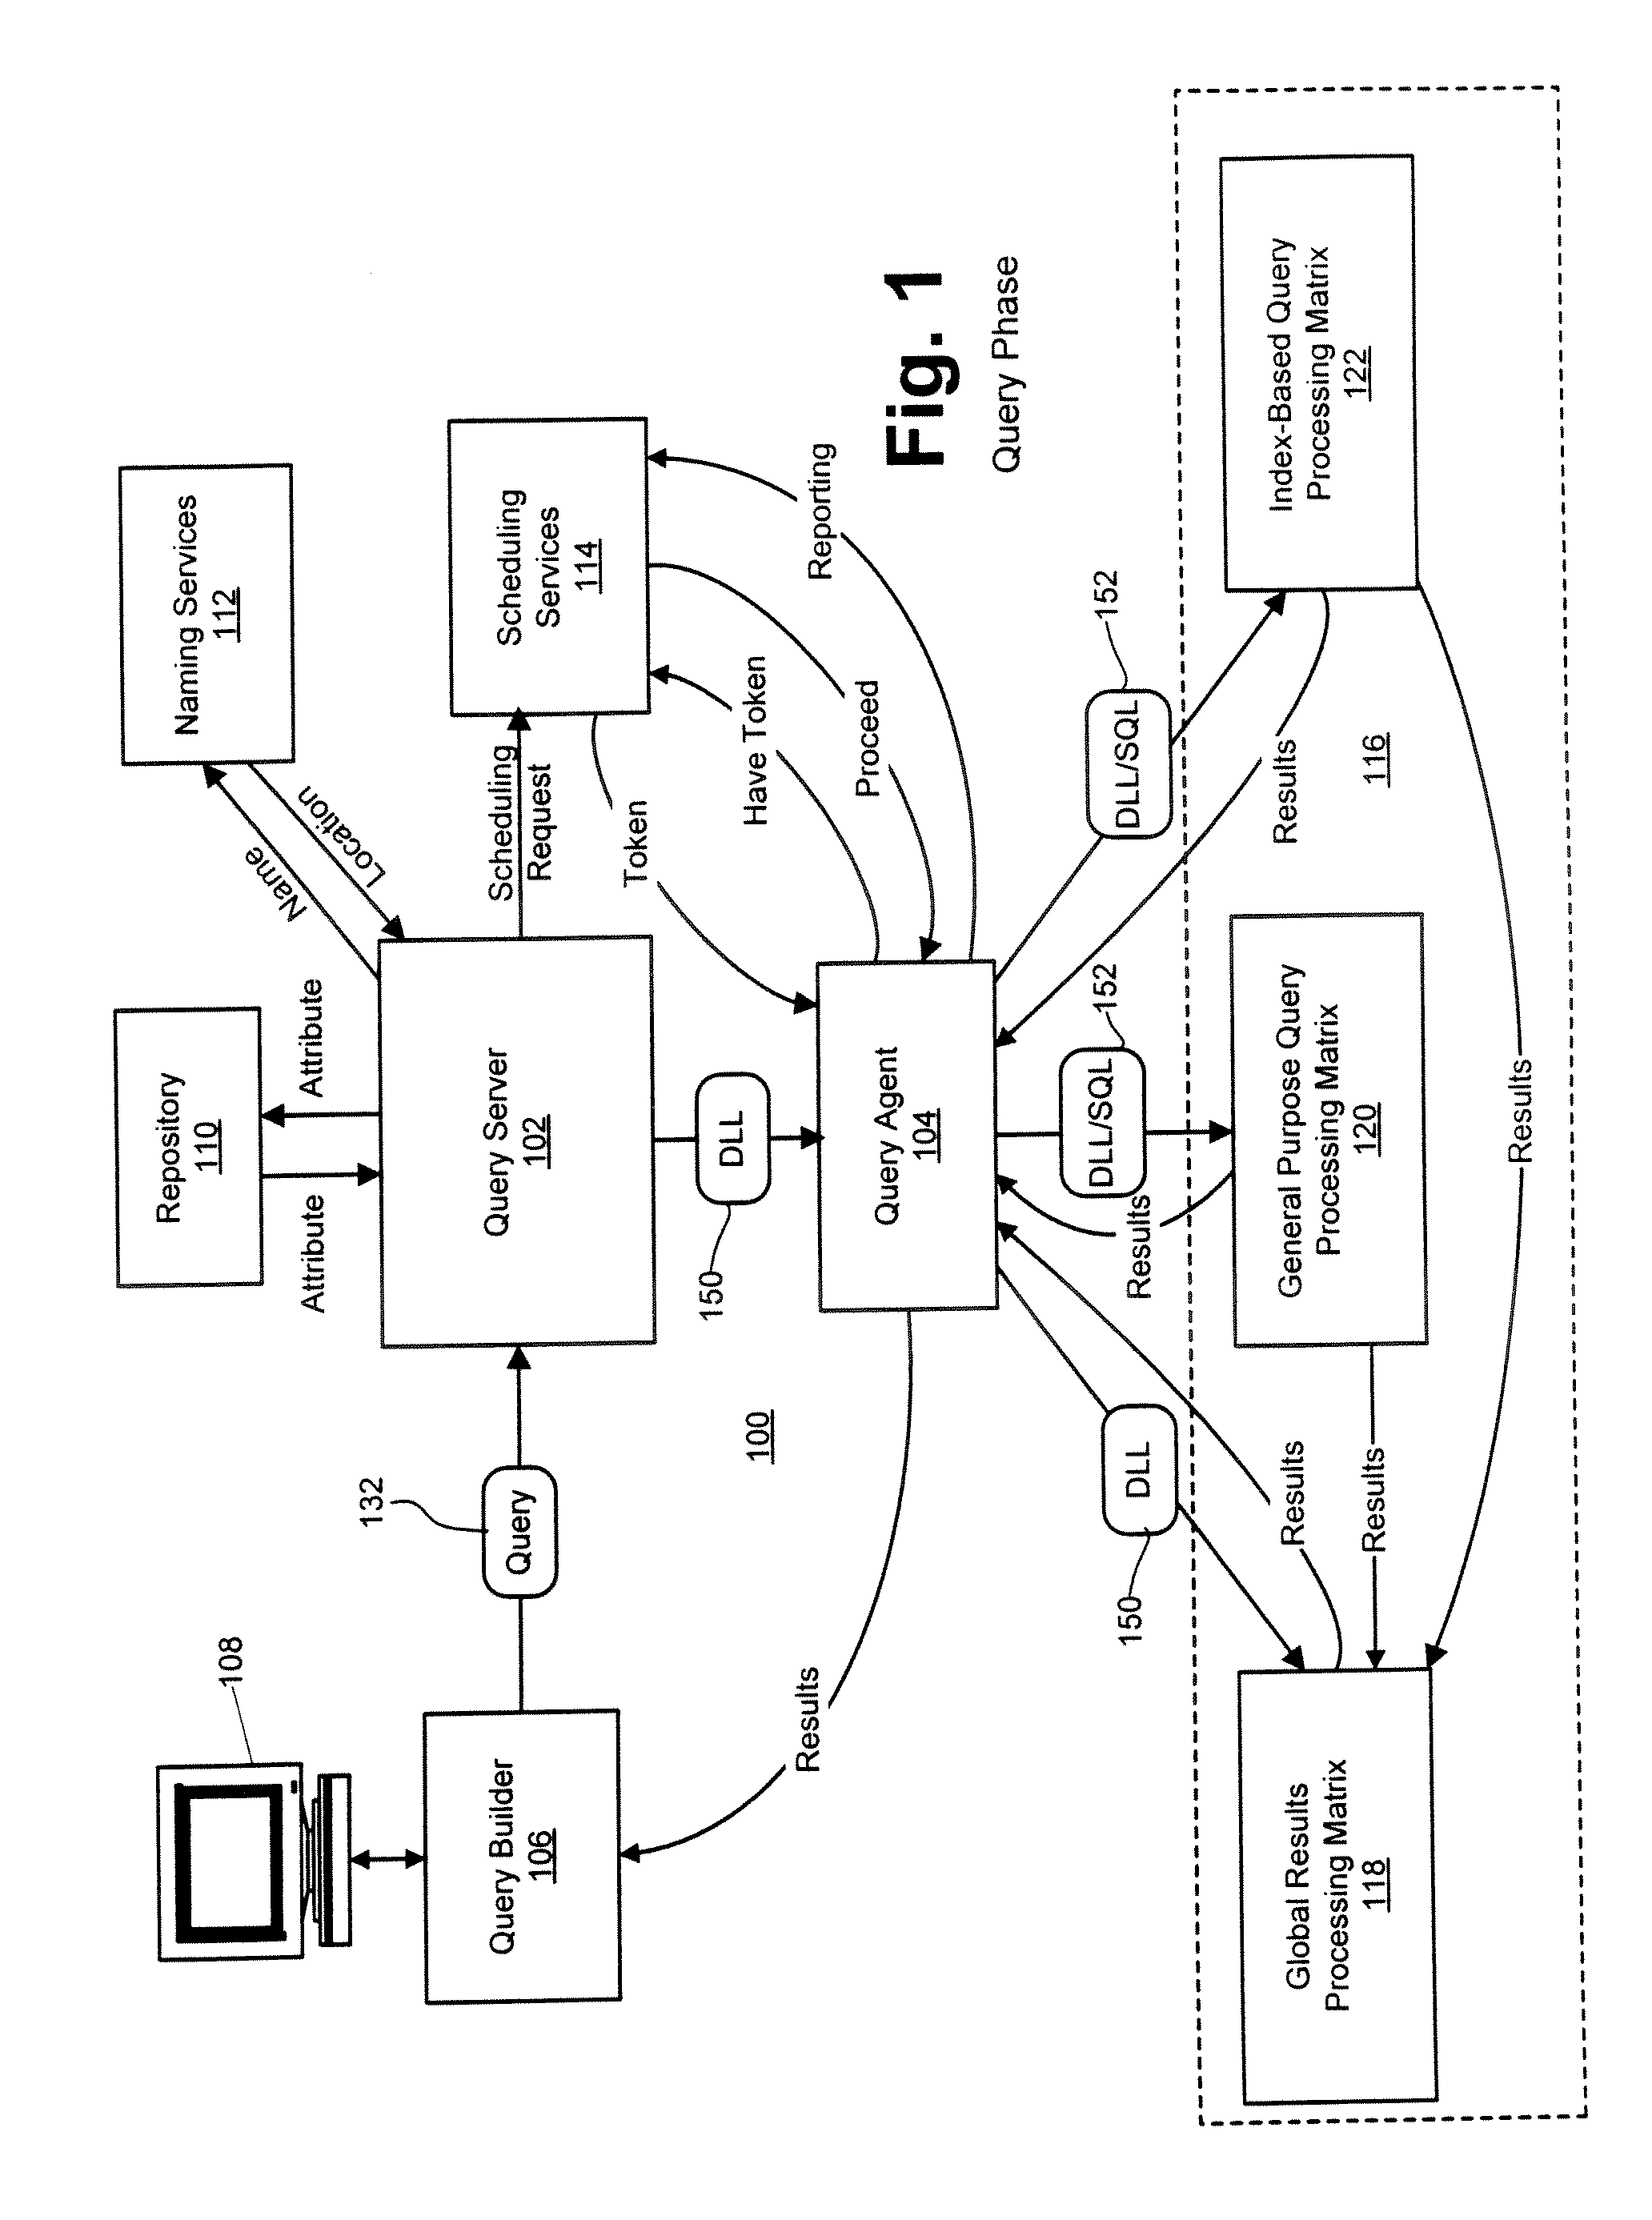 Query scheduling in a parallel-processing database system